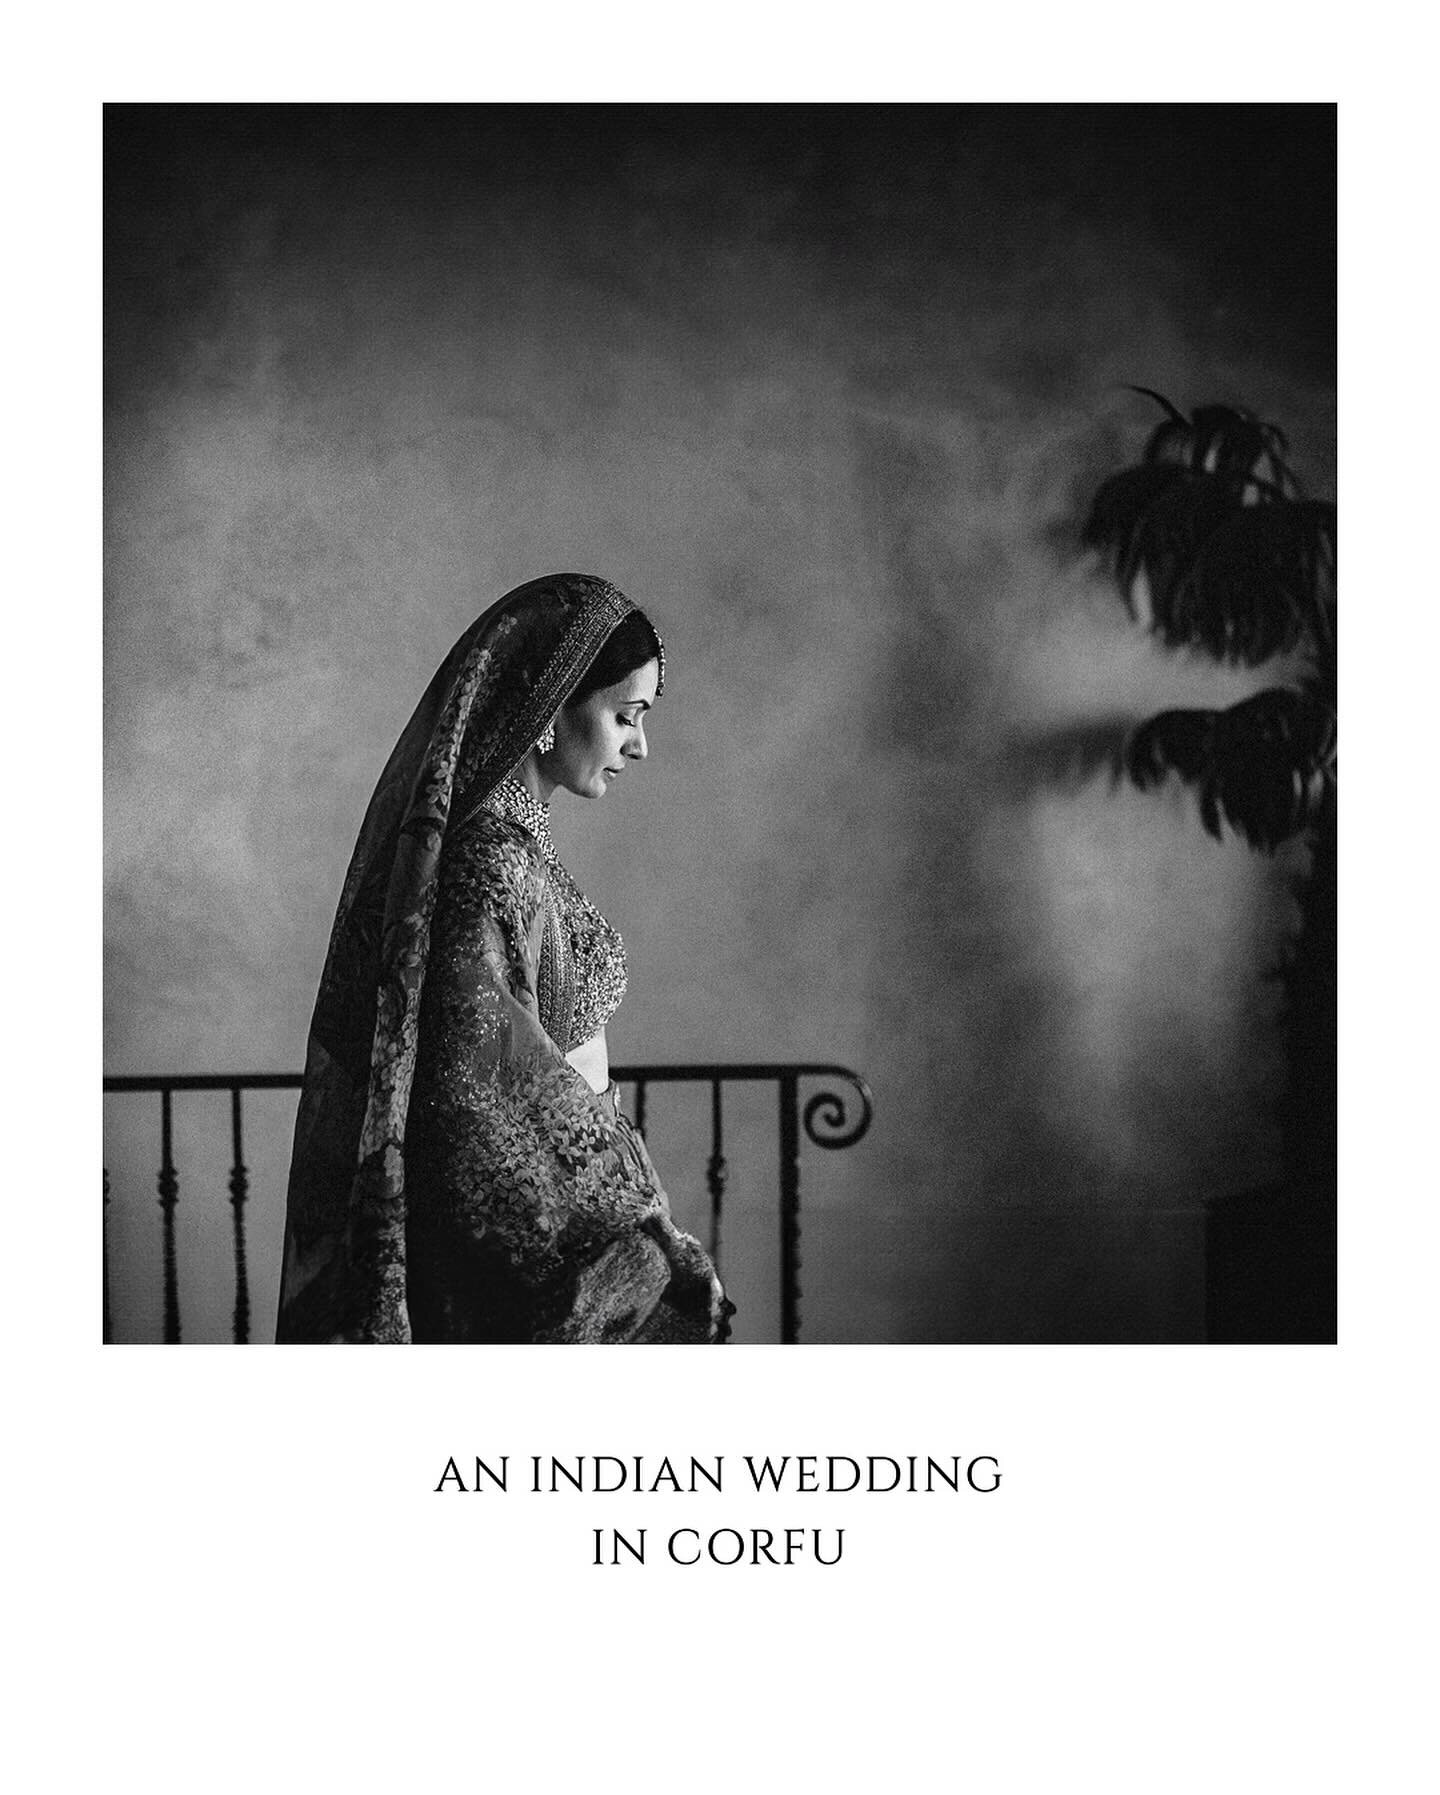 Amidst the verdant landscapes of Corfu, this wedding unfolded, as a testament to the enduring power of love and the timeless allure of tradition. Against the backdrop of the Ionian Seawith, with the vibrant colors of this traditional Indian wedding, 